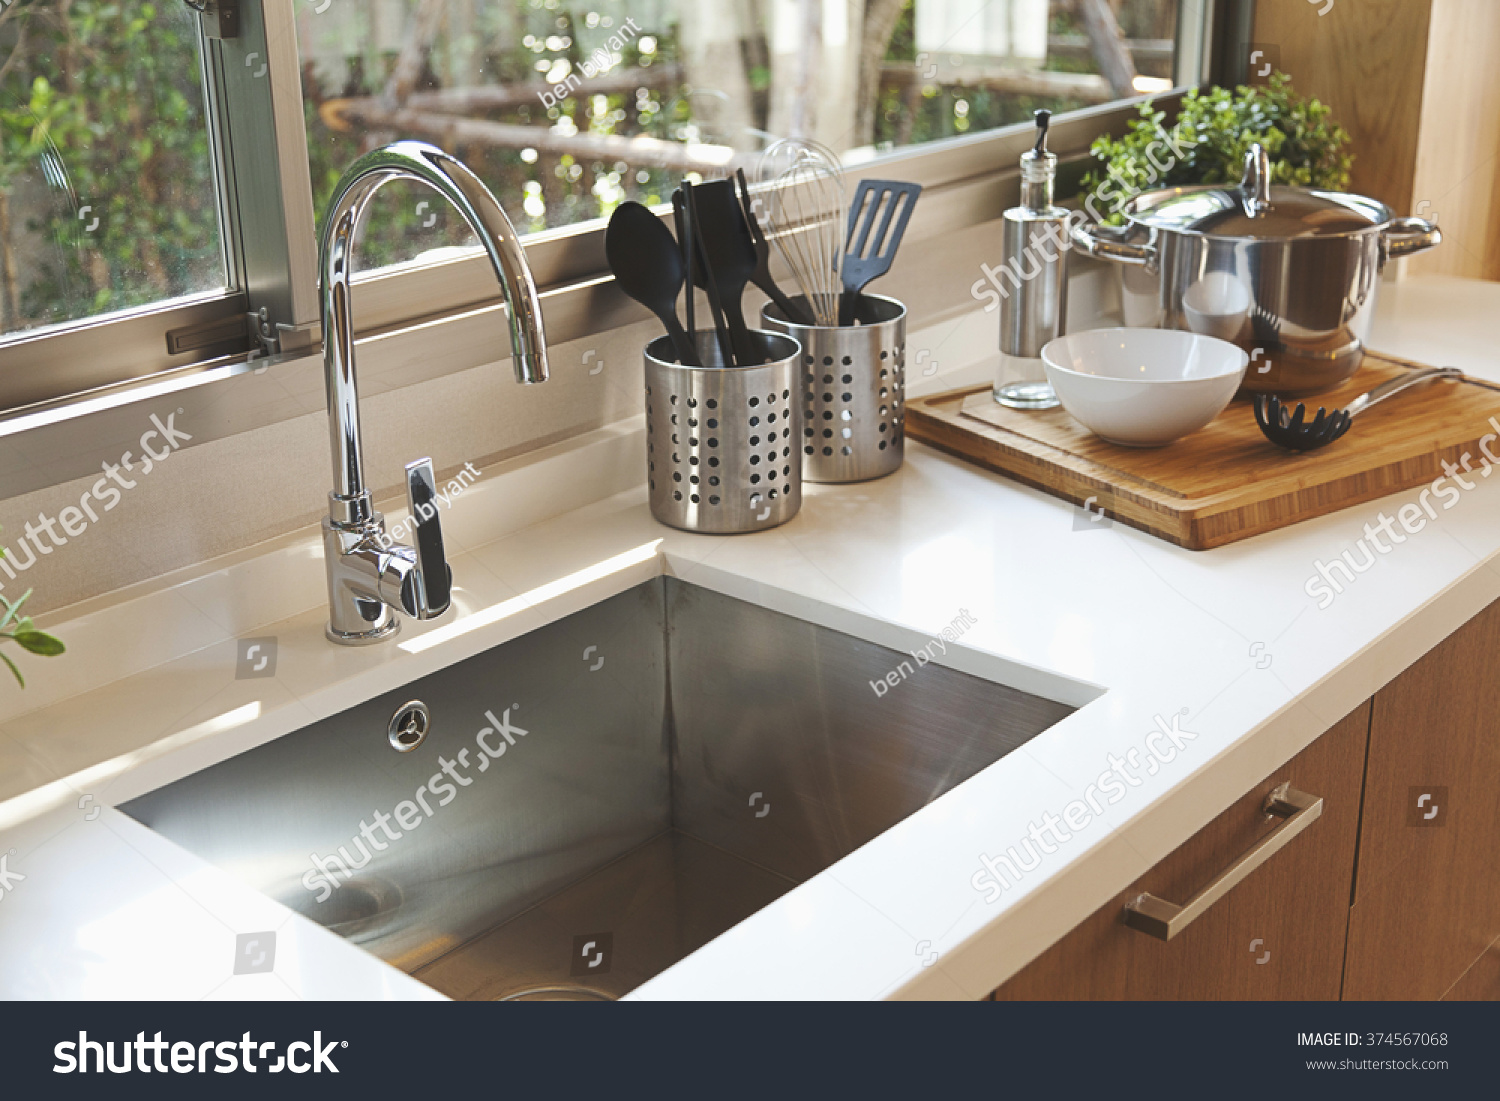 Kitchen sink and faucet #374567068